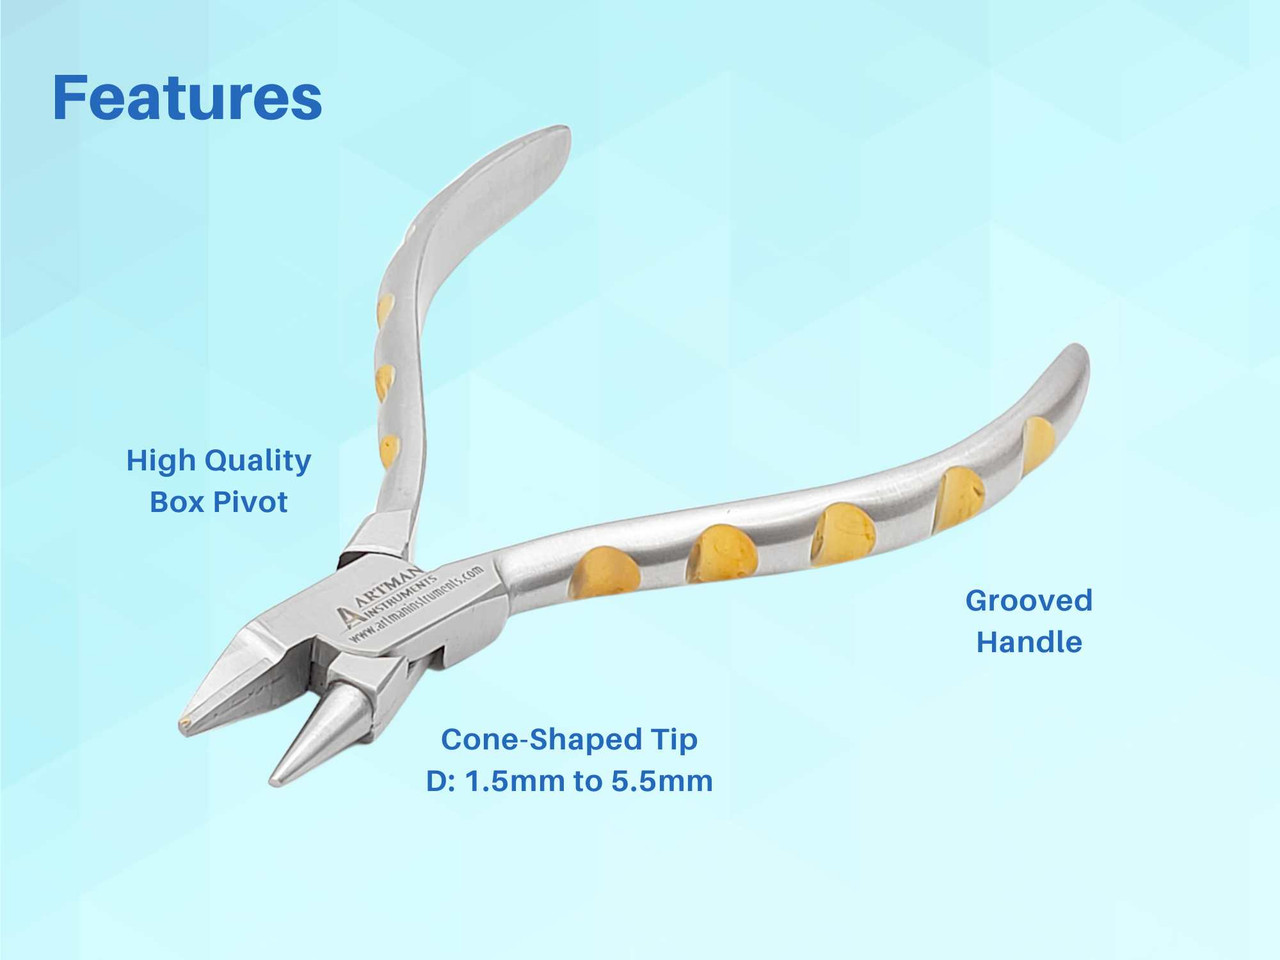 Chain Nose Pliers for Bending, Shaping and Looping Wire, 5.5 Inch Jewelry  Making Tool